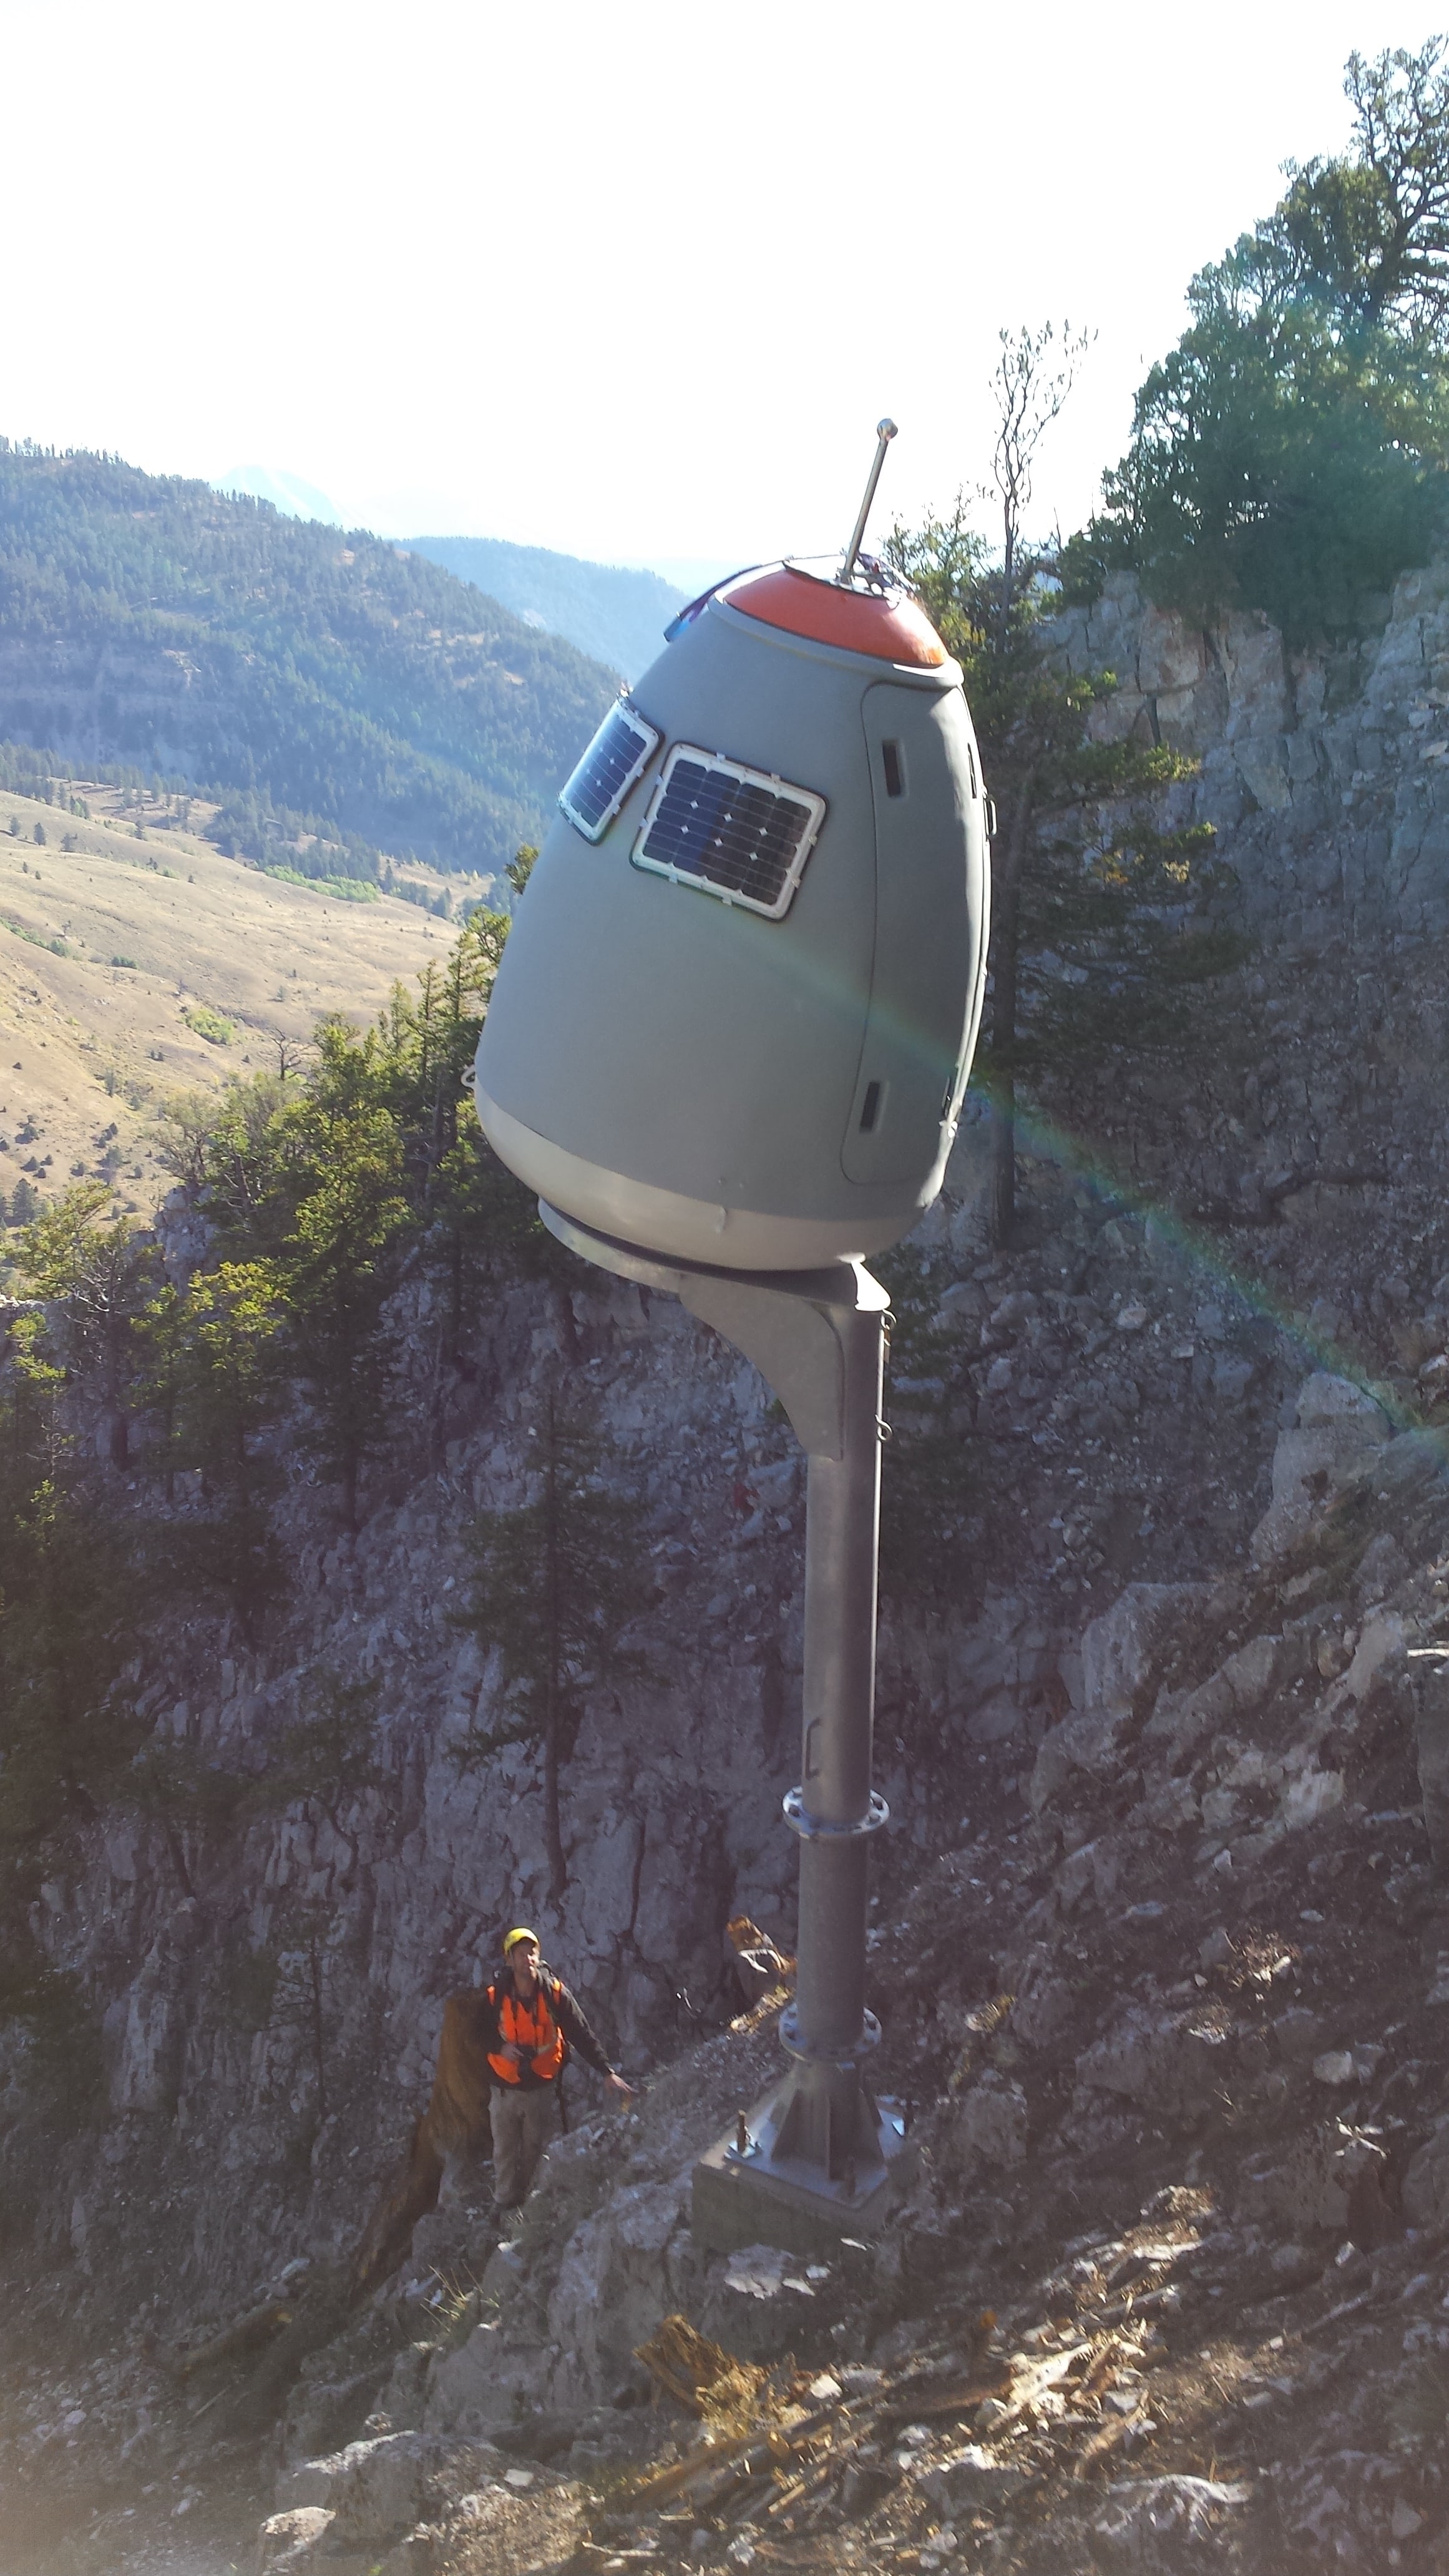 The O’Bellx exploder dwarfs a worker in the Cow of the Woods avalanche path in the Hoback Canyon. The device enables an operator to set off an explosion to provoke an avalanche while safely protected from the snowslide far away. The new contraptions can be removed, serviced, and replaced by helicopter. (WYDOT)